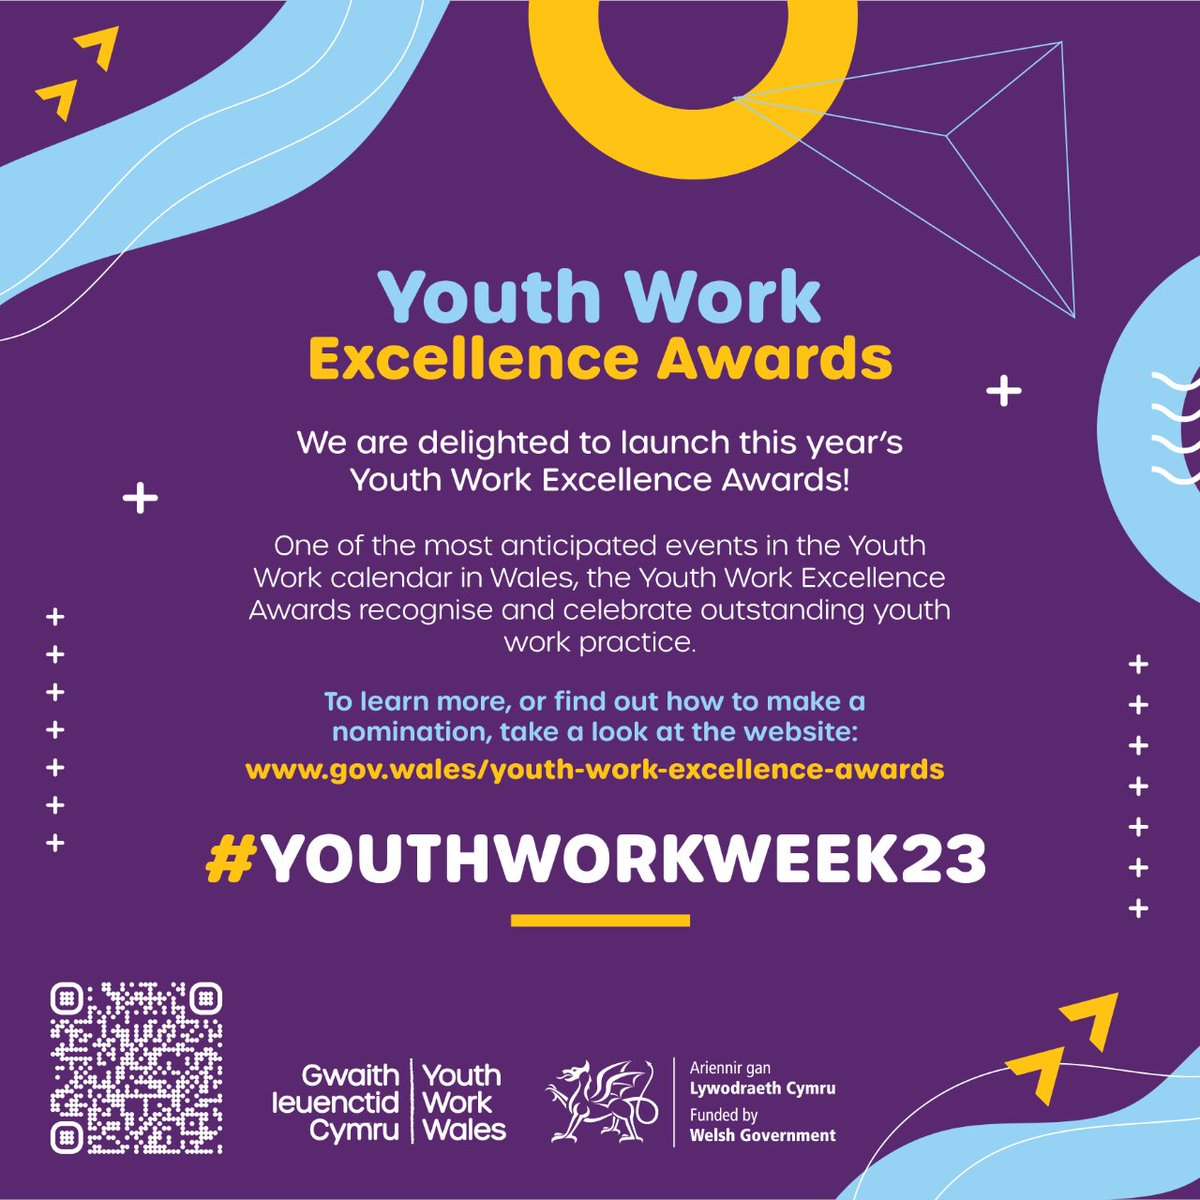 Youth Work Excellence Awards 2023 #YouthWorkAwards23